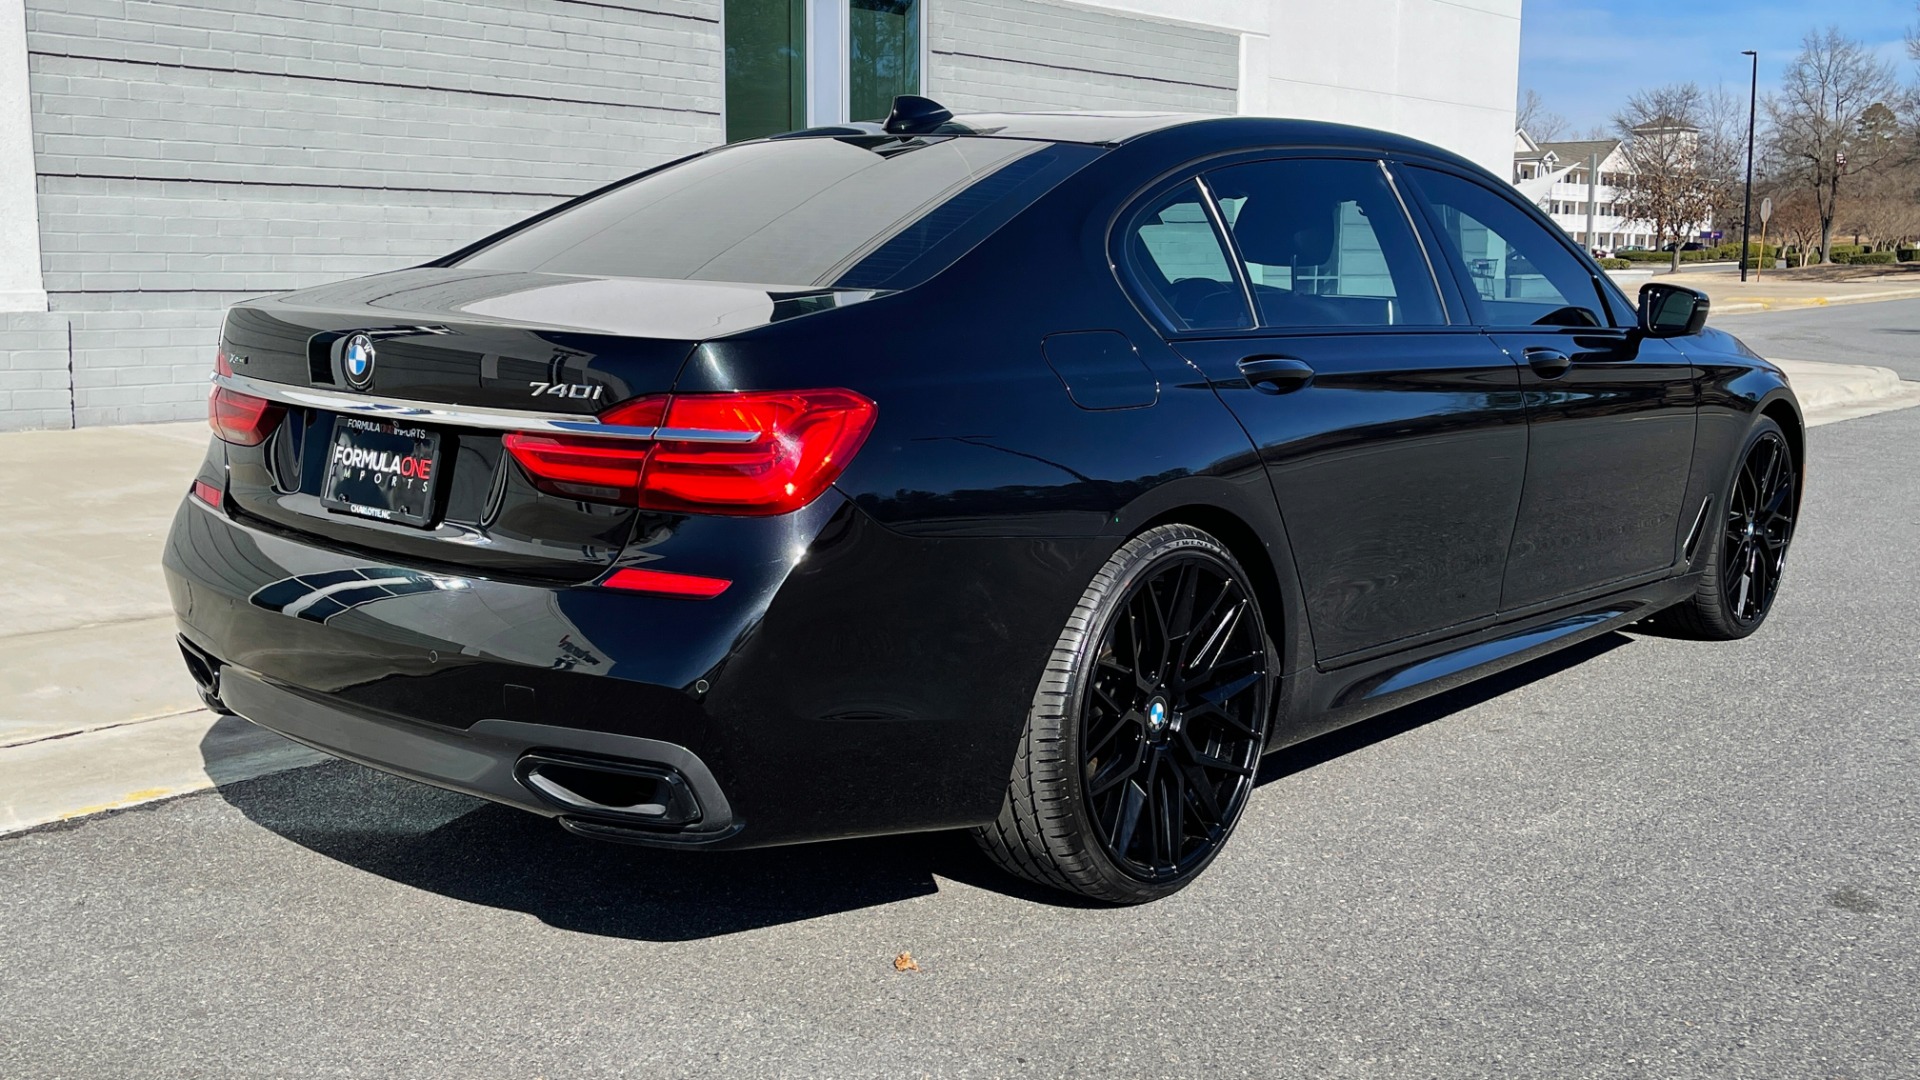 Used 2019 BMW 7 SERIES 740I XDRIVE M-SPORT / CLD WTHR / NAV / SUNROOF / REARVIEW / 22IN WHLS for sale Sold at Formula Imports in Charlotte NC 28227 10